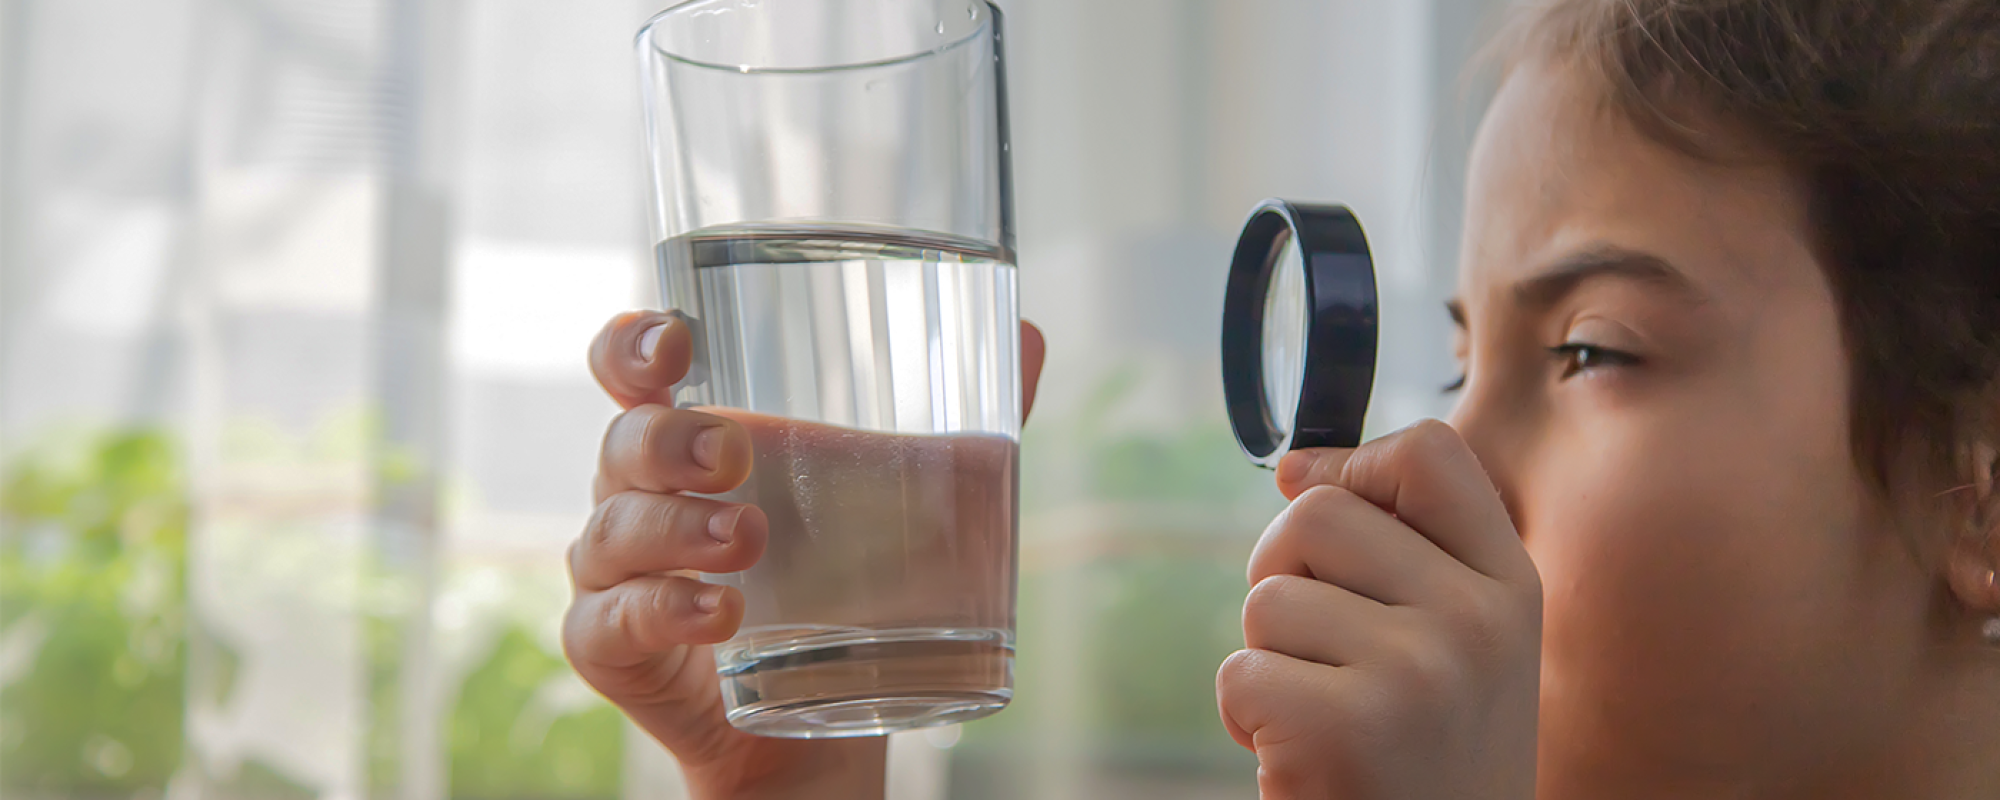 Home page photo of child examining a glass of water with magnifying glass.